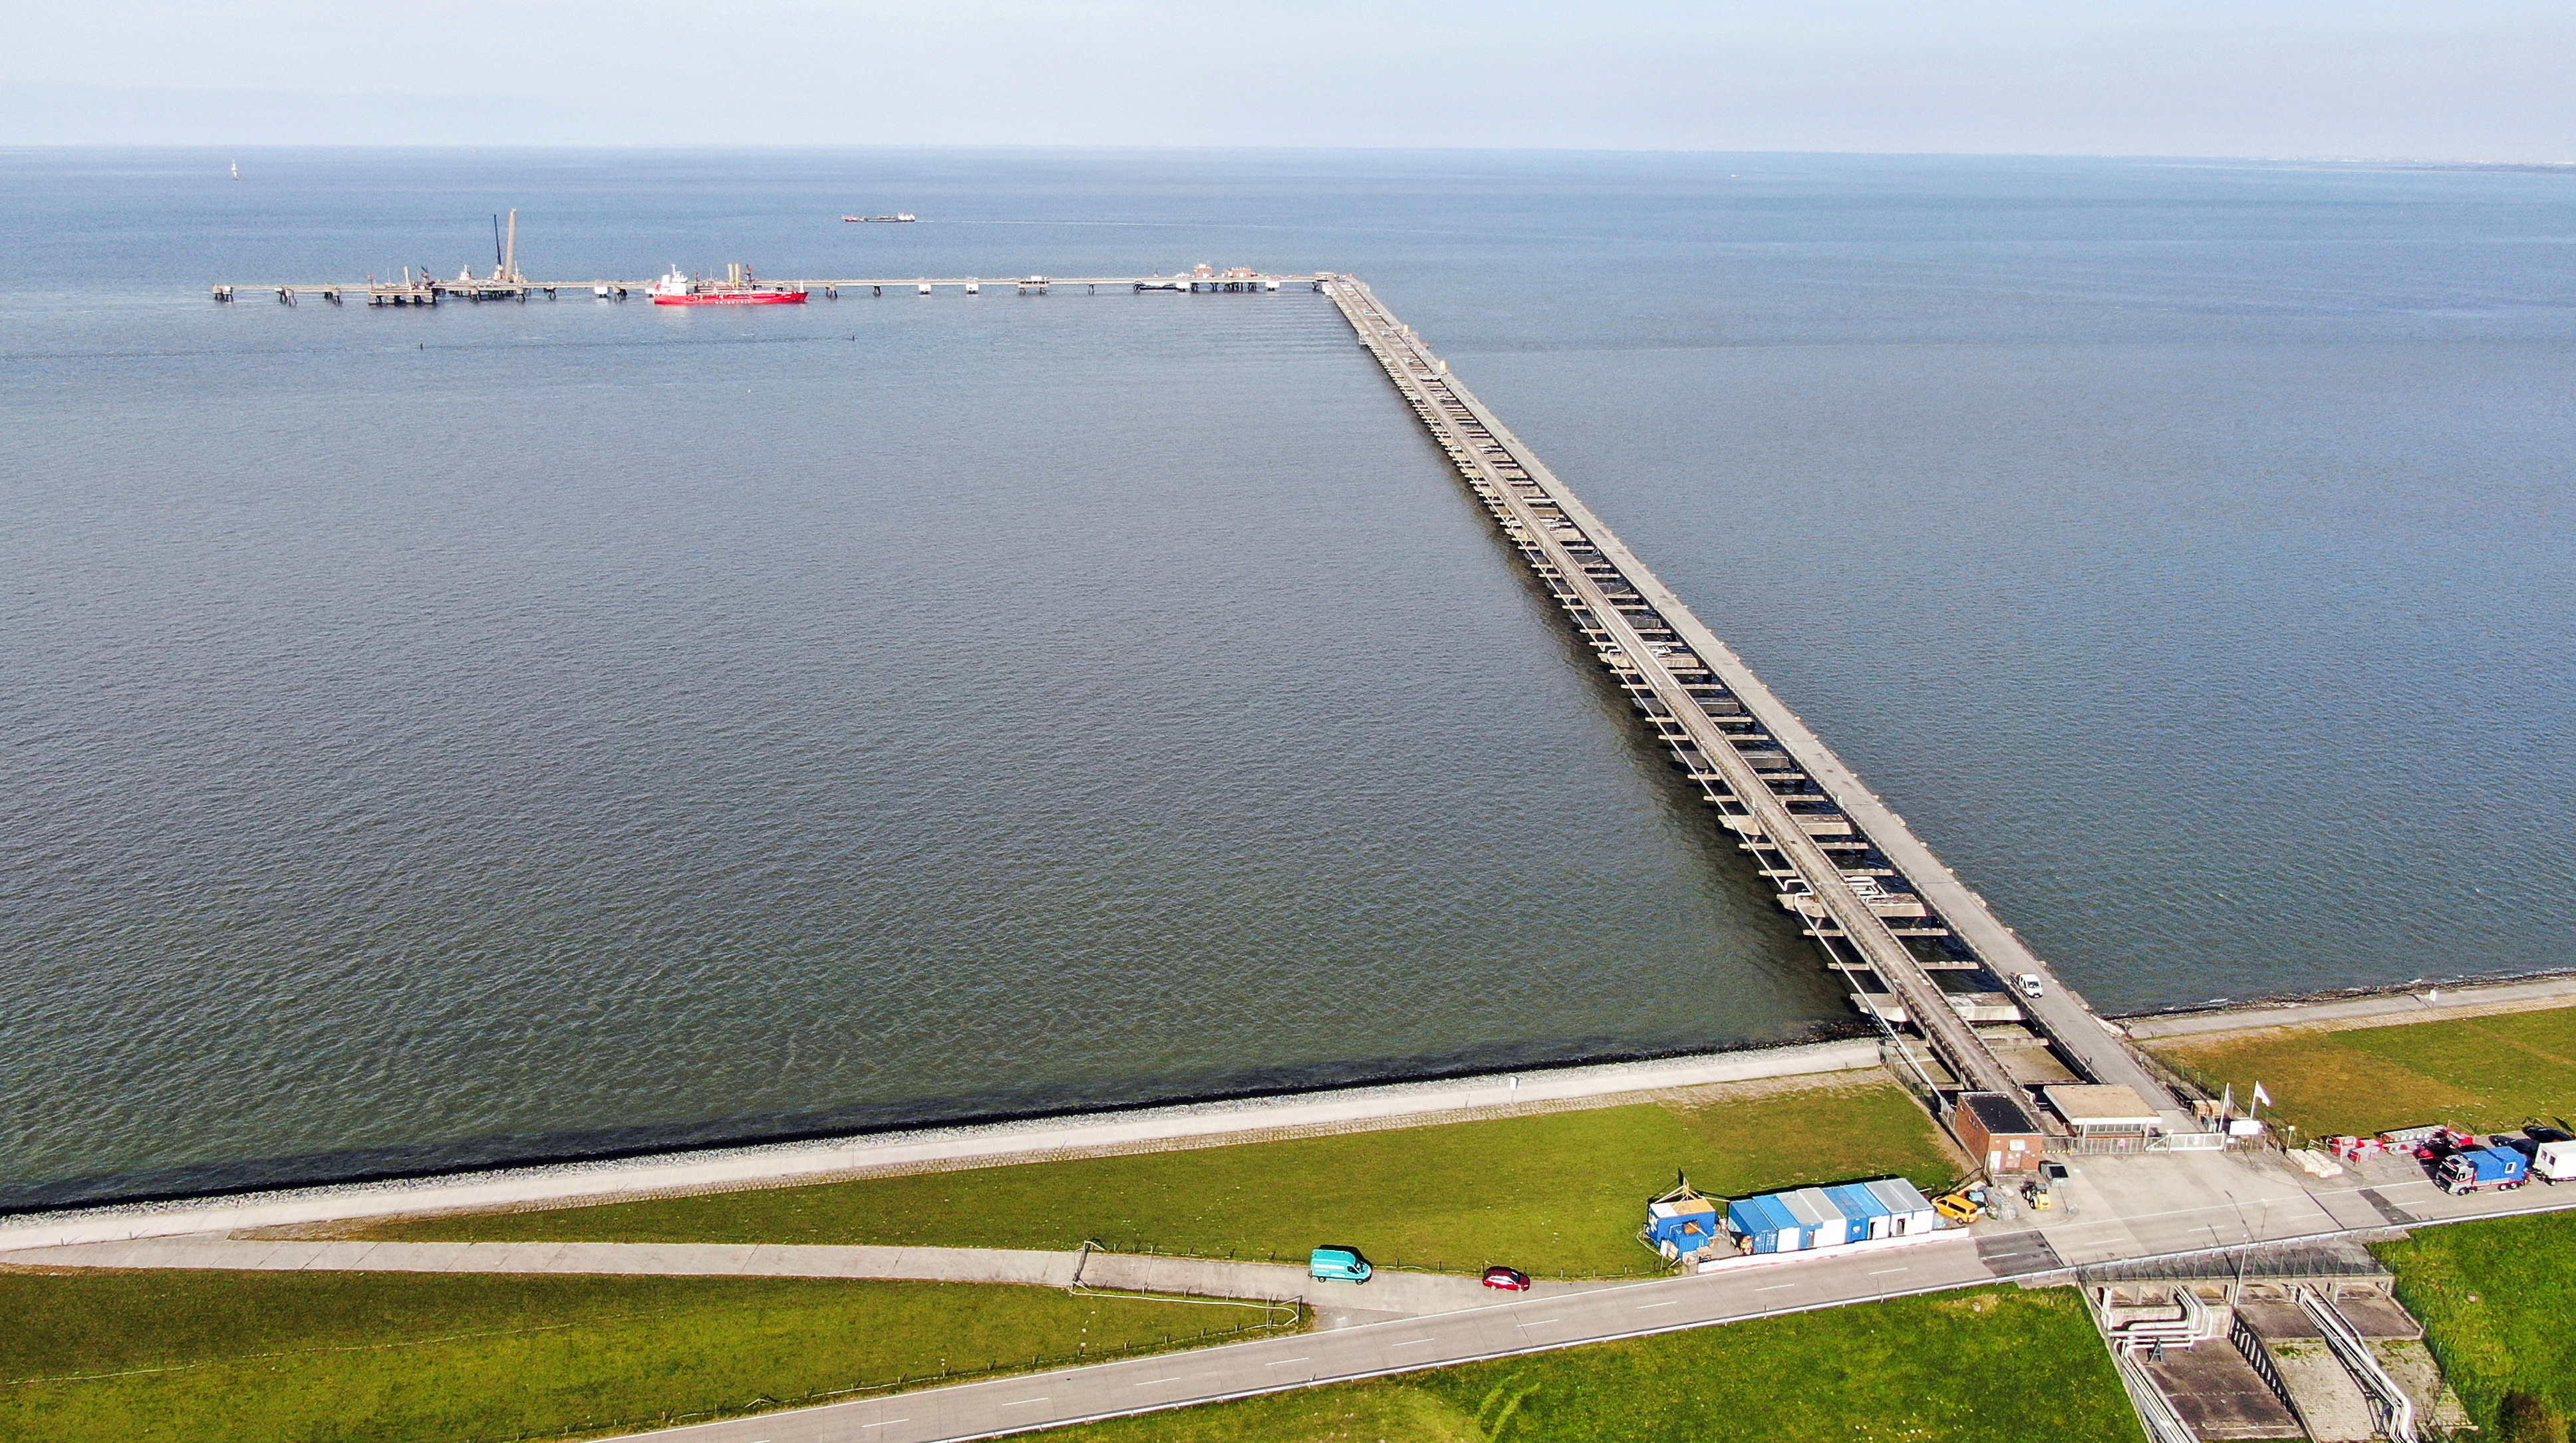 Aerial view of a pier for a planned floating LNG terminal in the harbour, in Wilhelmshaven